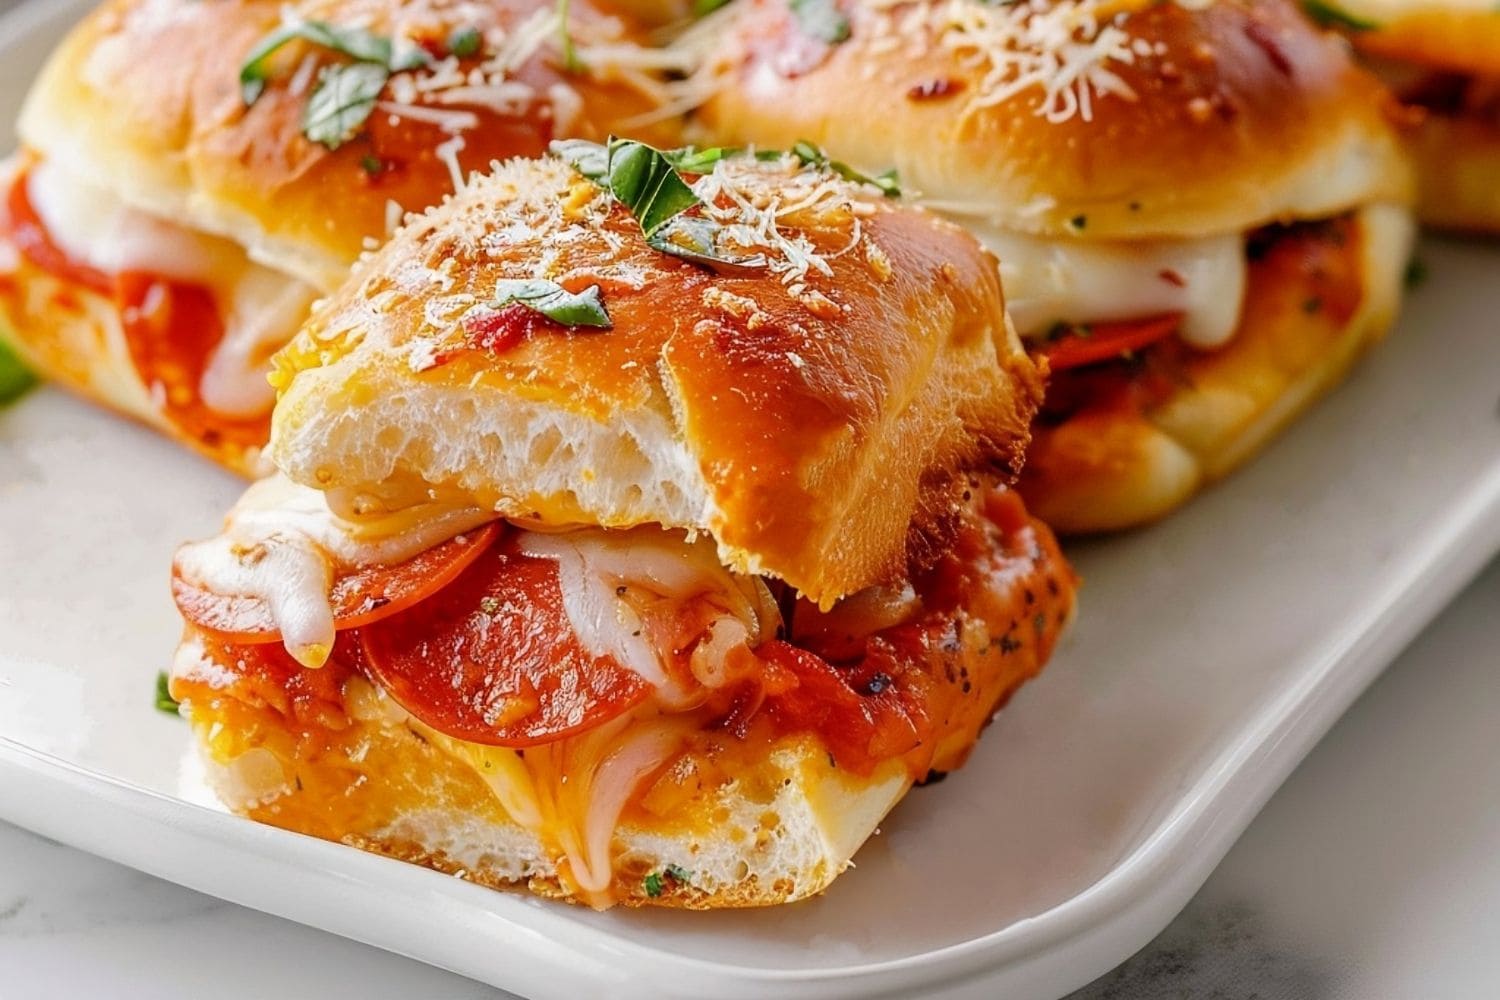 Mini pizza sliders with pepperoni, cheese and herbs in a platter